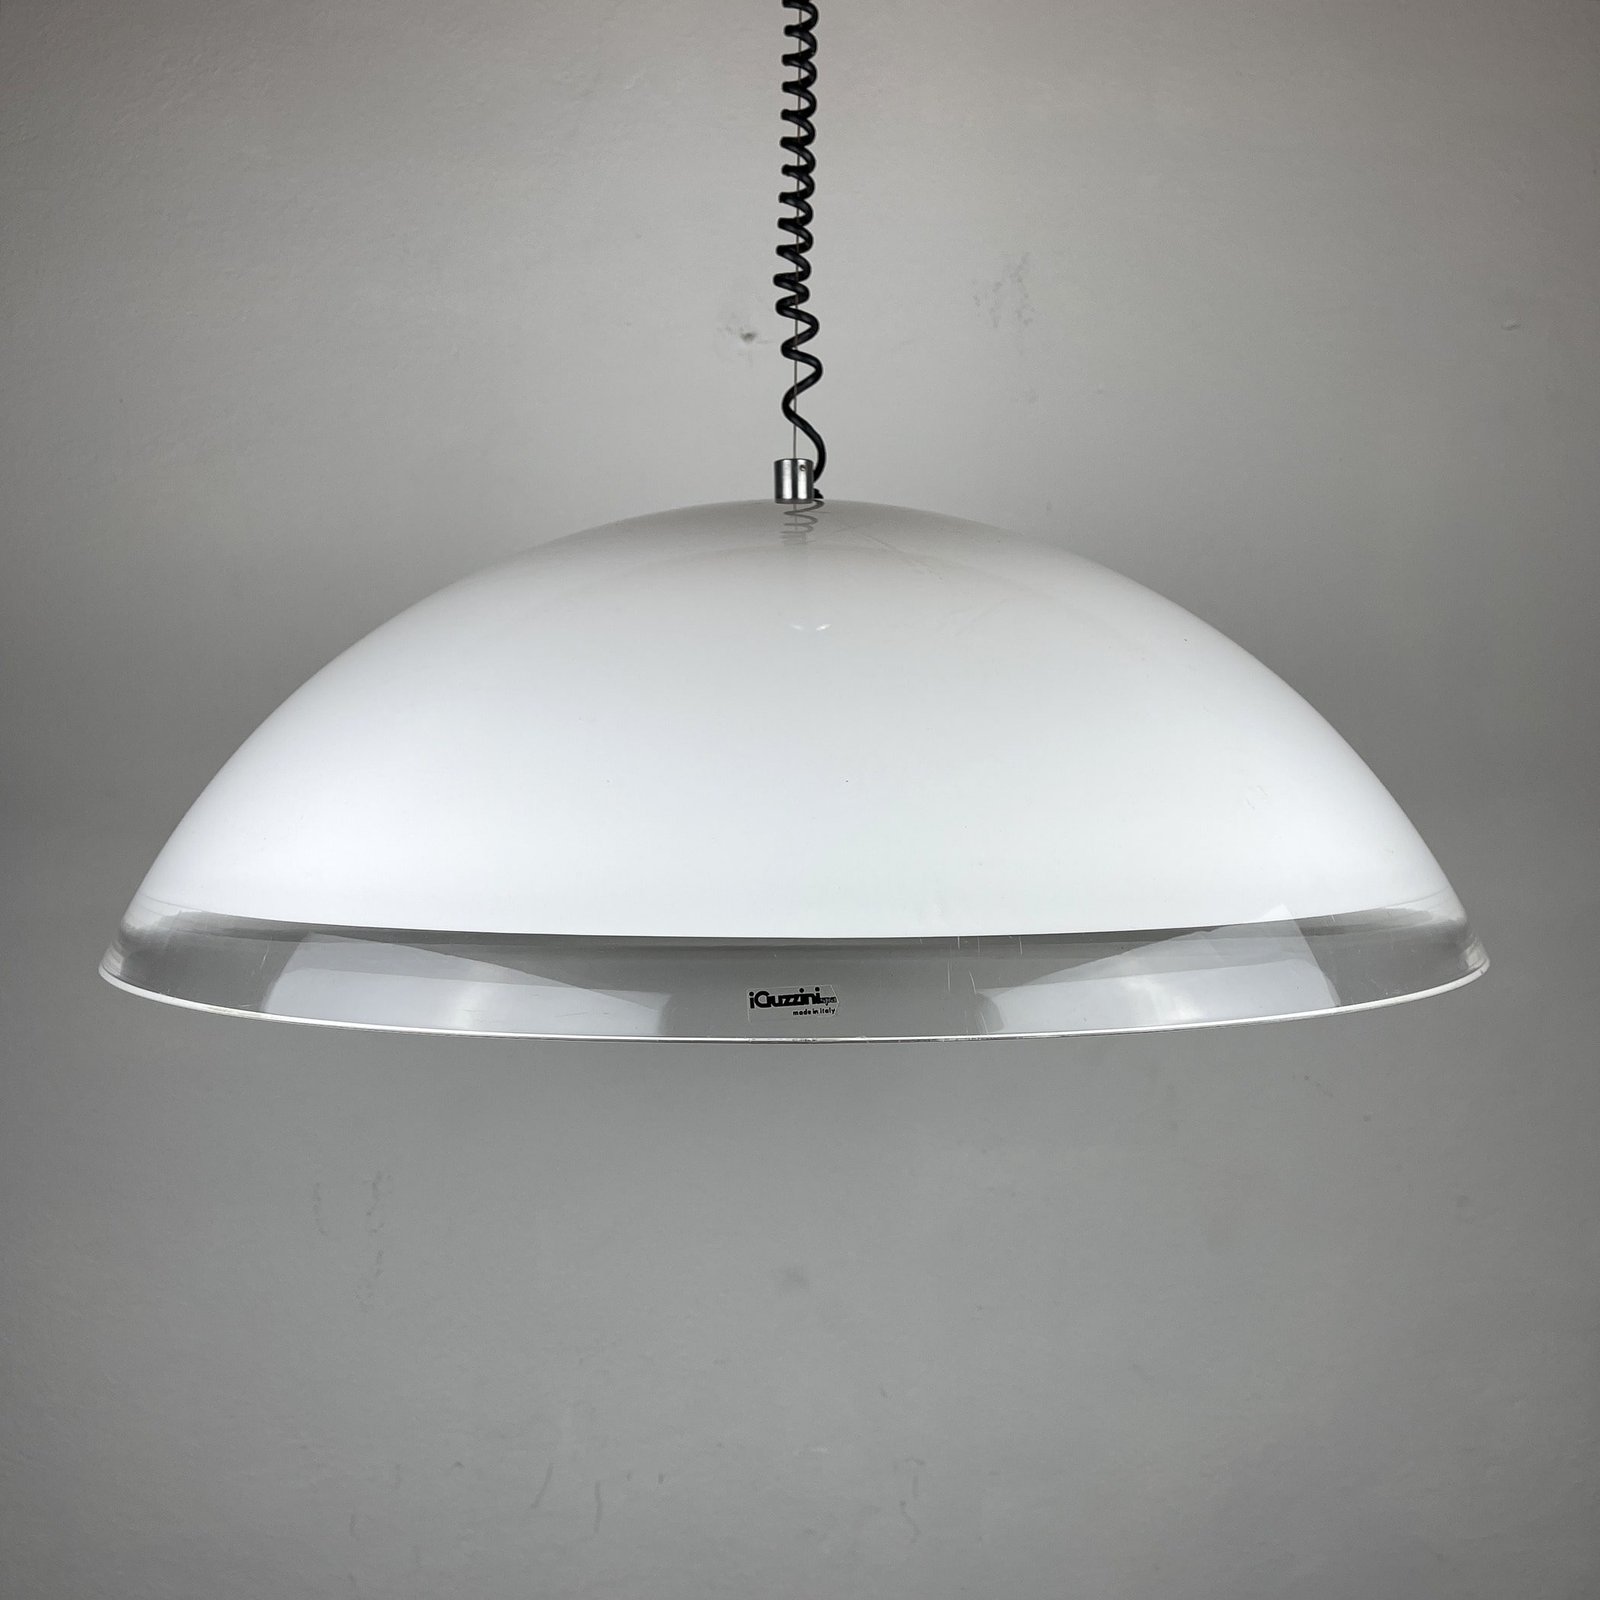 Mid-century XL white plastic pendant lamp by iGuzzini Italy 1980s Vintage Hanging Light Space Age Modern